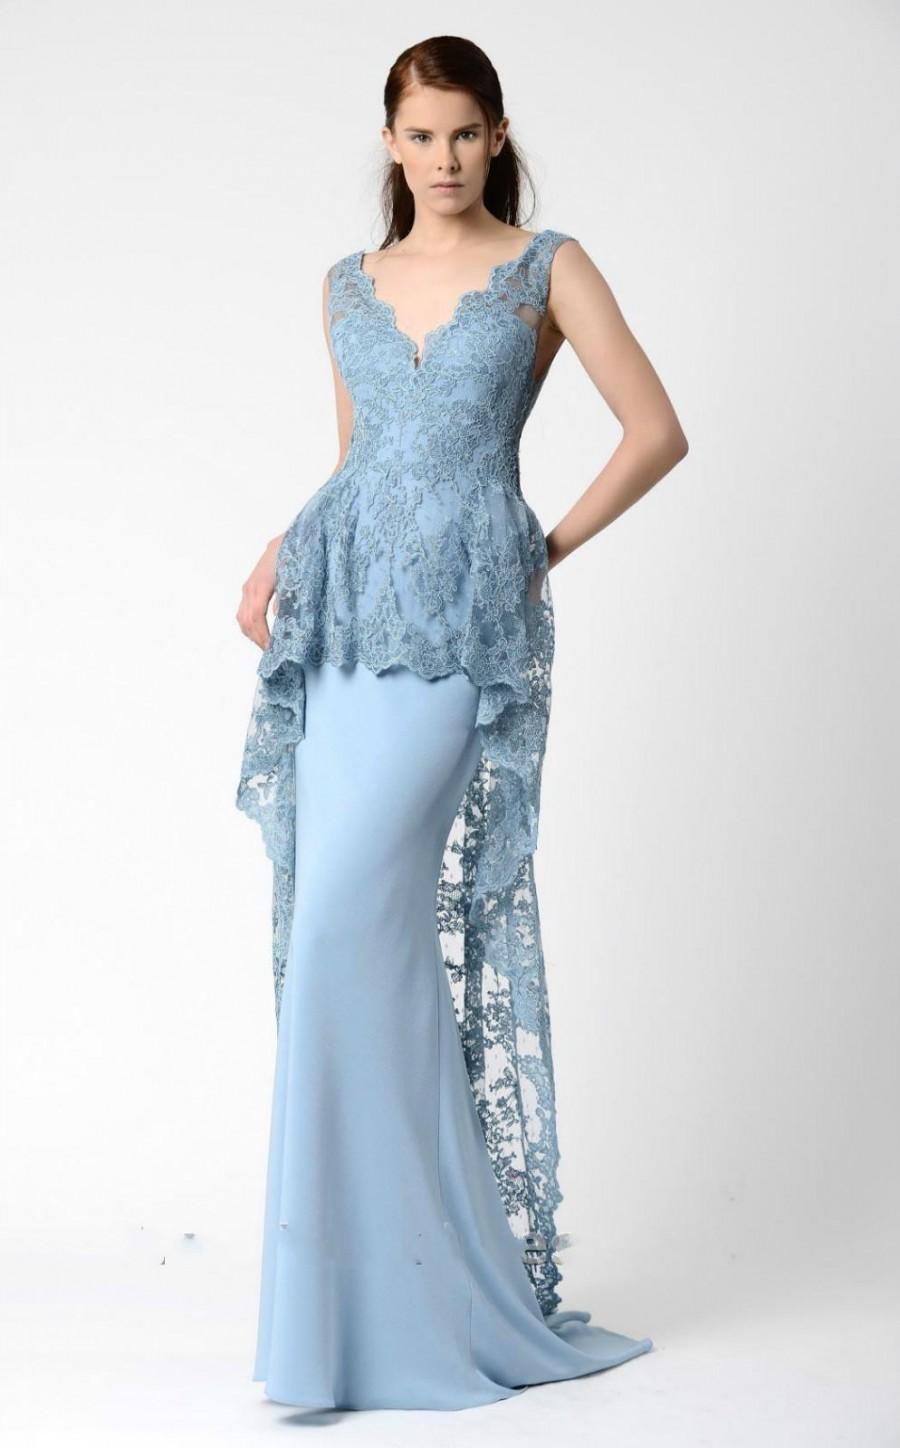 Свадьба - 2016 Mermaid Evening Dresses Gowns Formal Prom With V Neck Sheer Neckline Sexy Bare Back Appliqued Blue Lace Party Formal Full Length Online with $126.39/Piece on Hjklp88's Store 